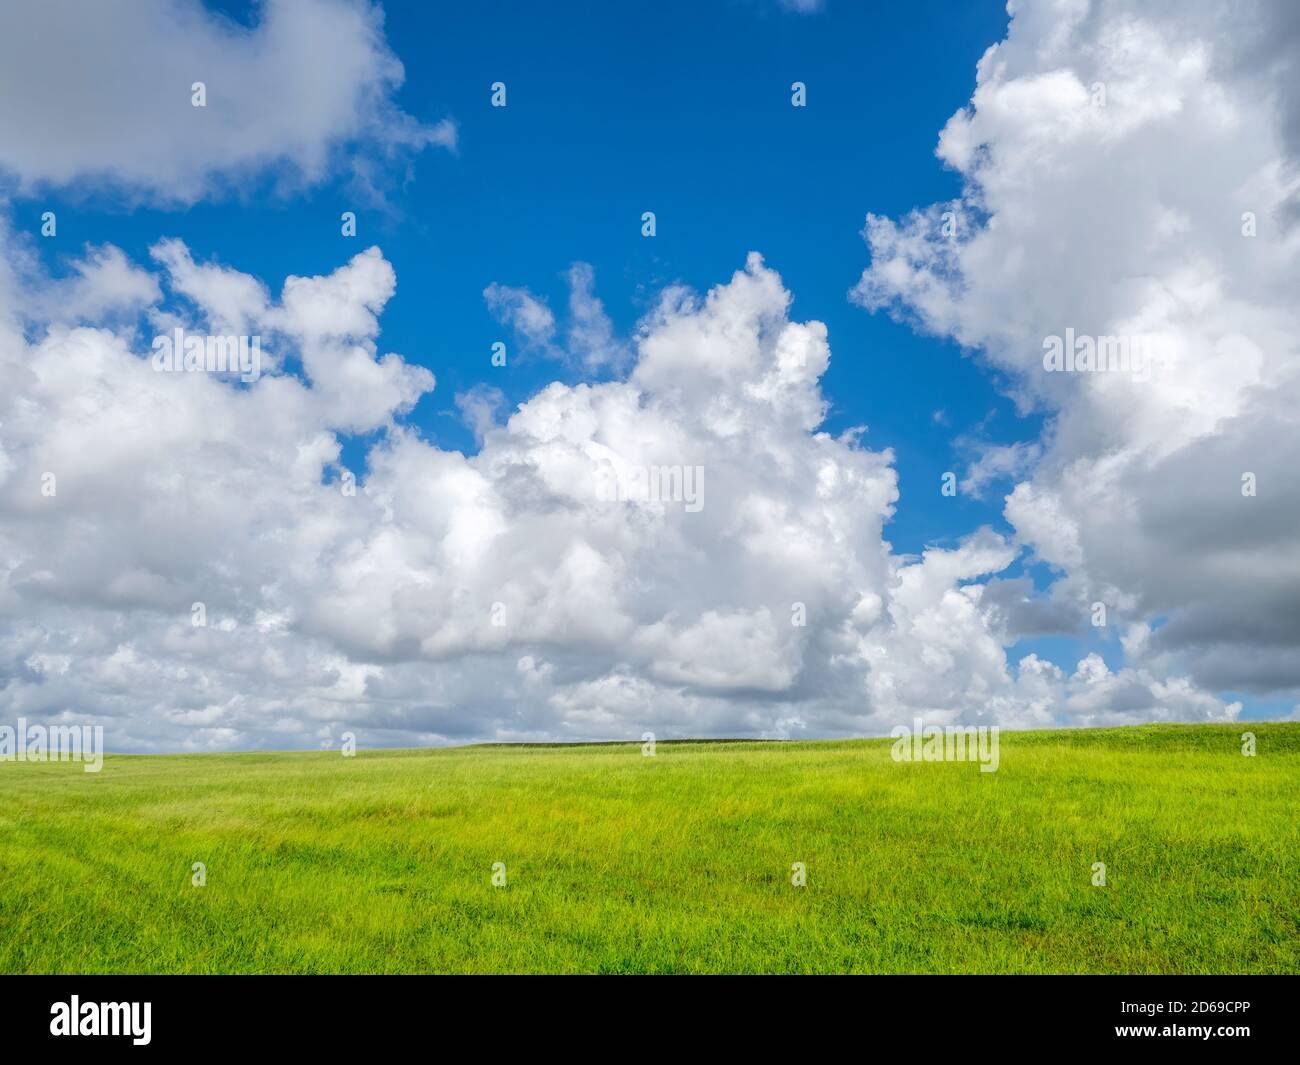 Blue sky with big white clouds filling most of sky overgreen field in southwest Florida Stock Photo